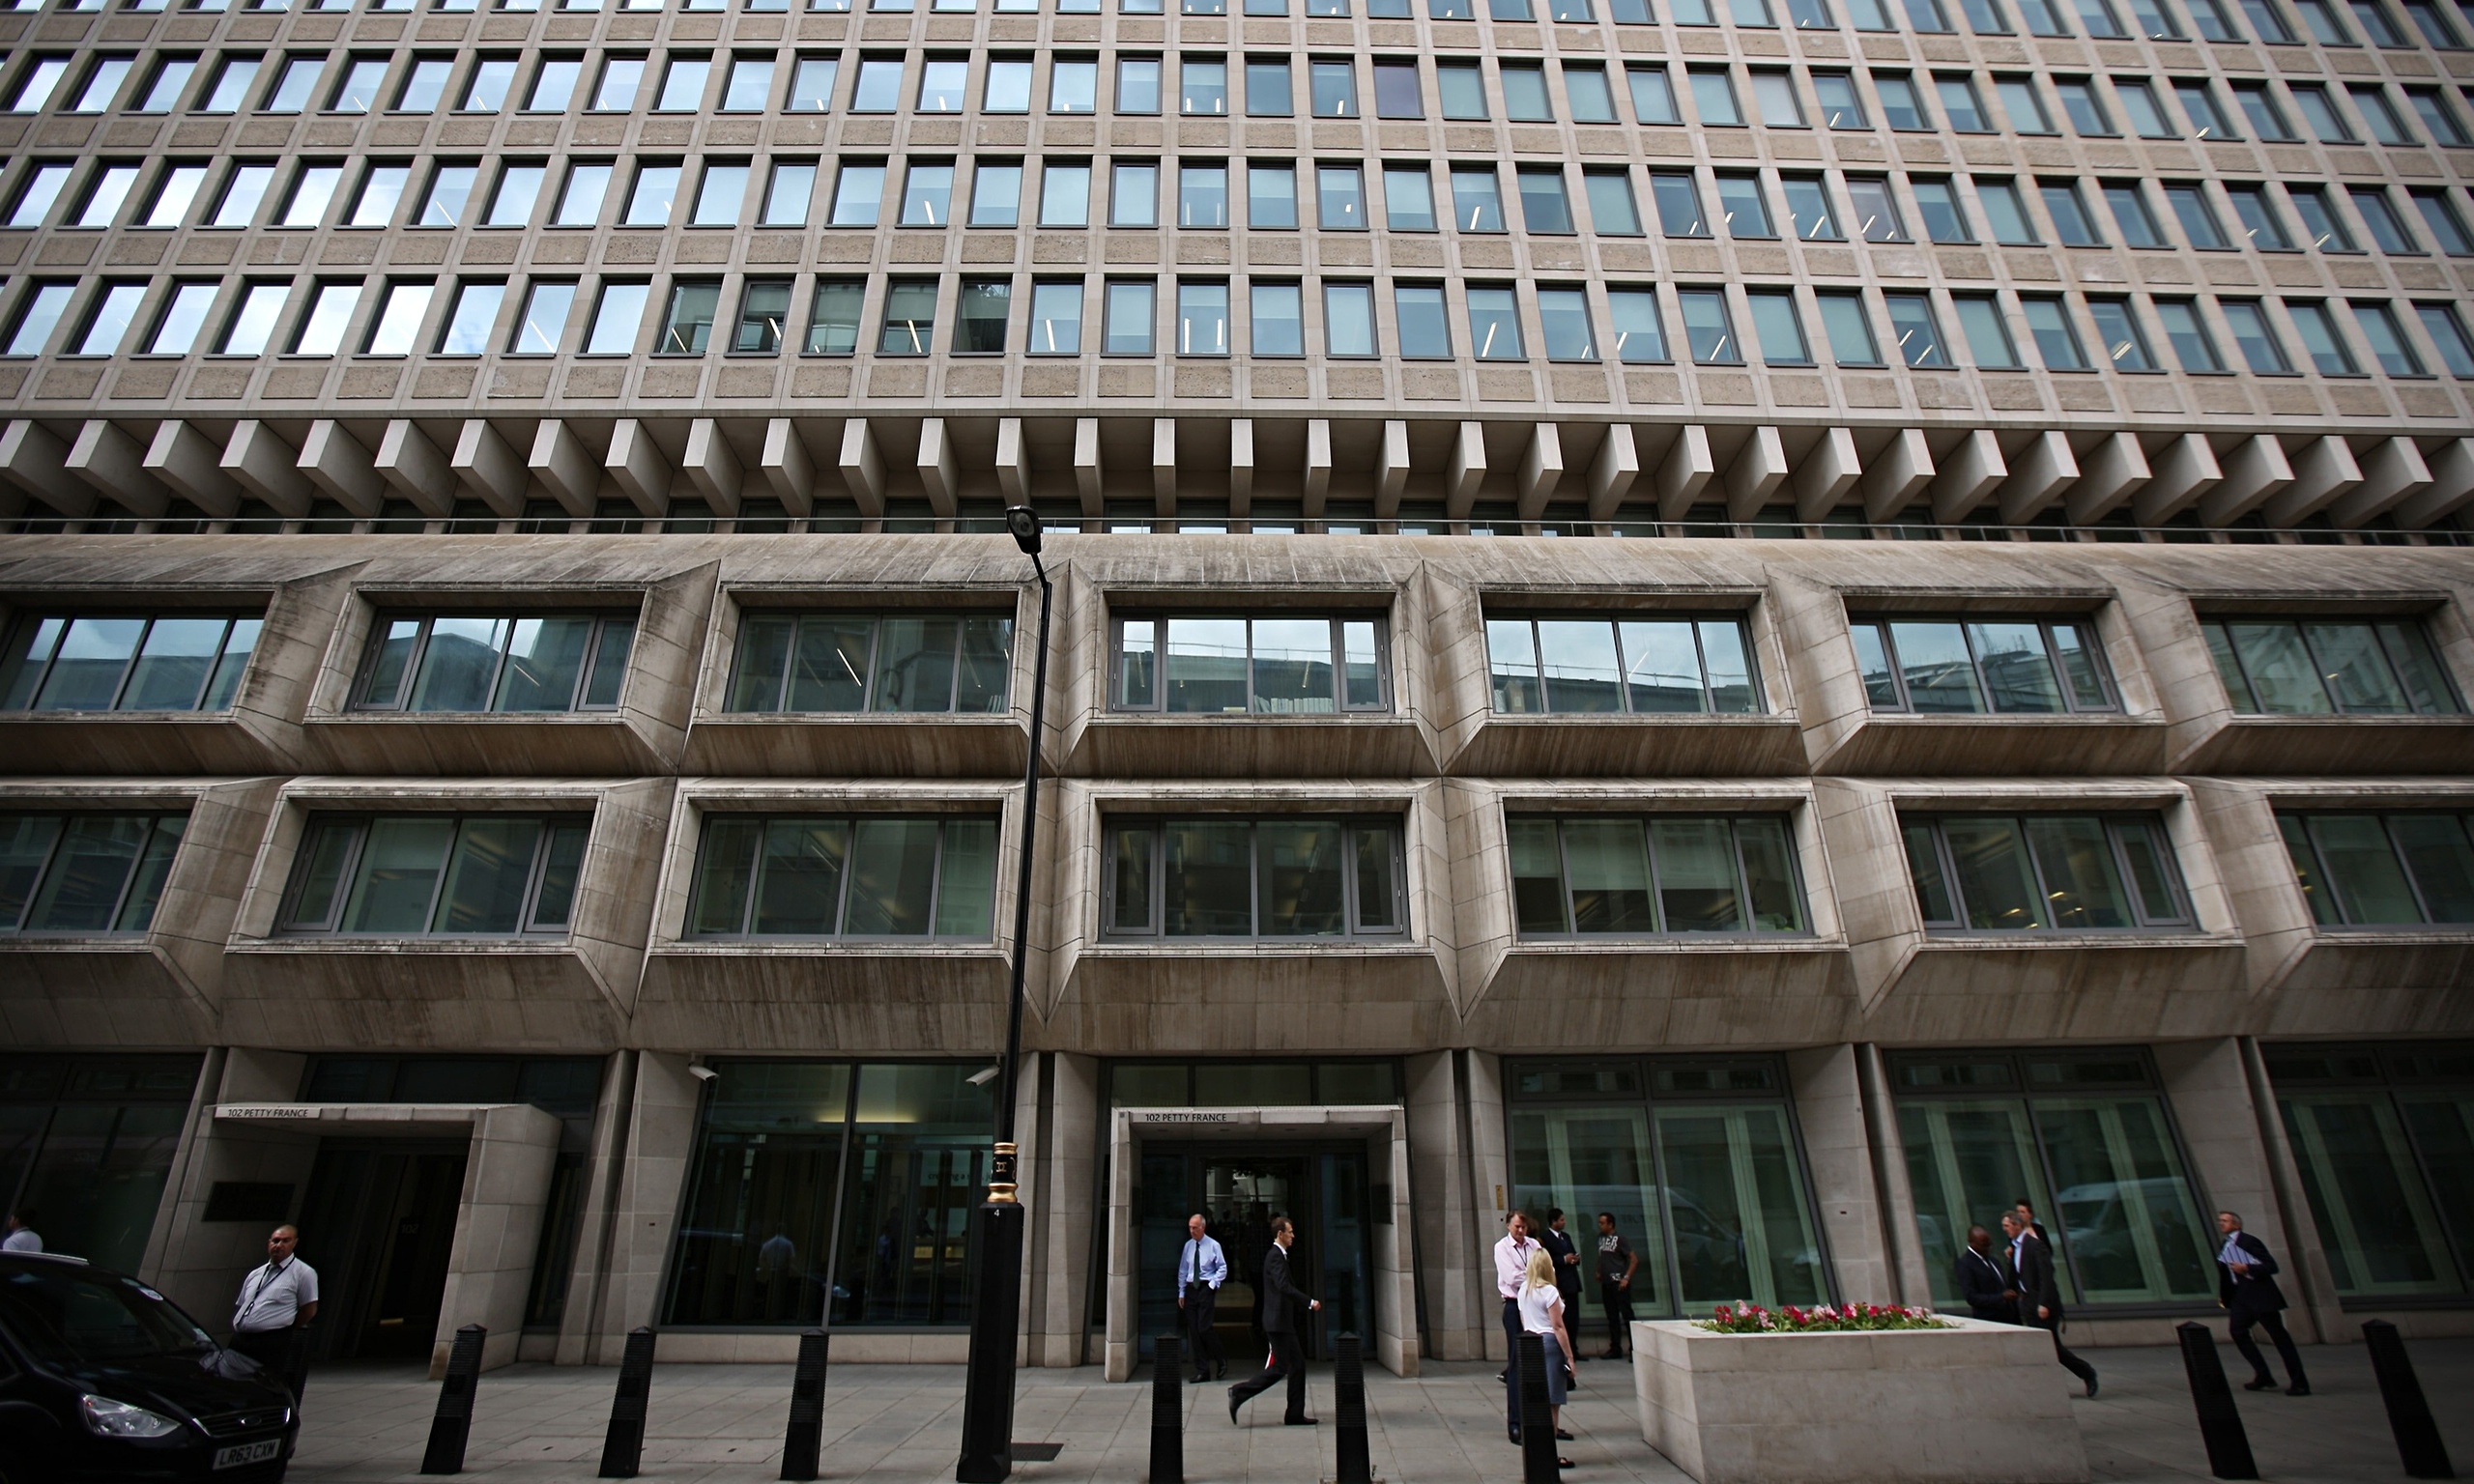 Ministry of Justice fined £180,000 for losing sensitive data on